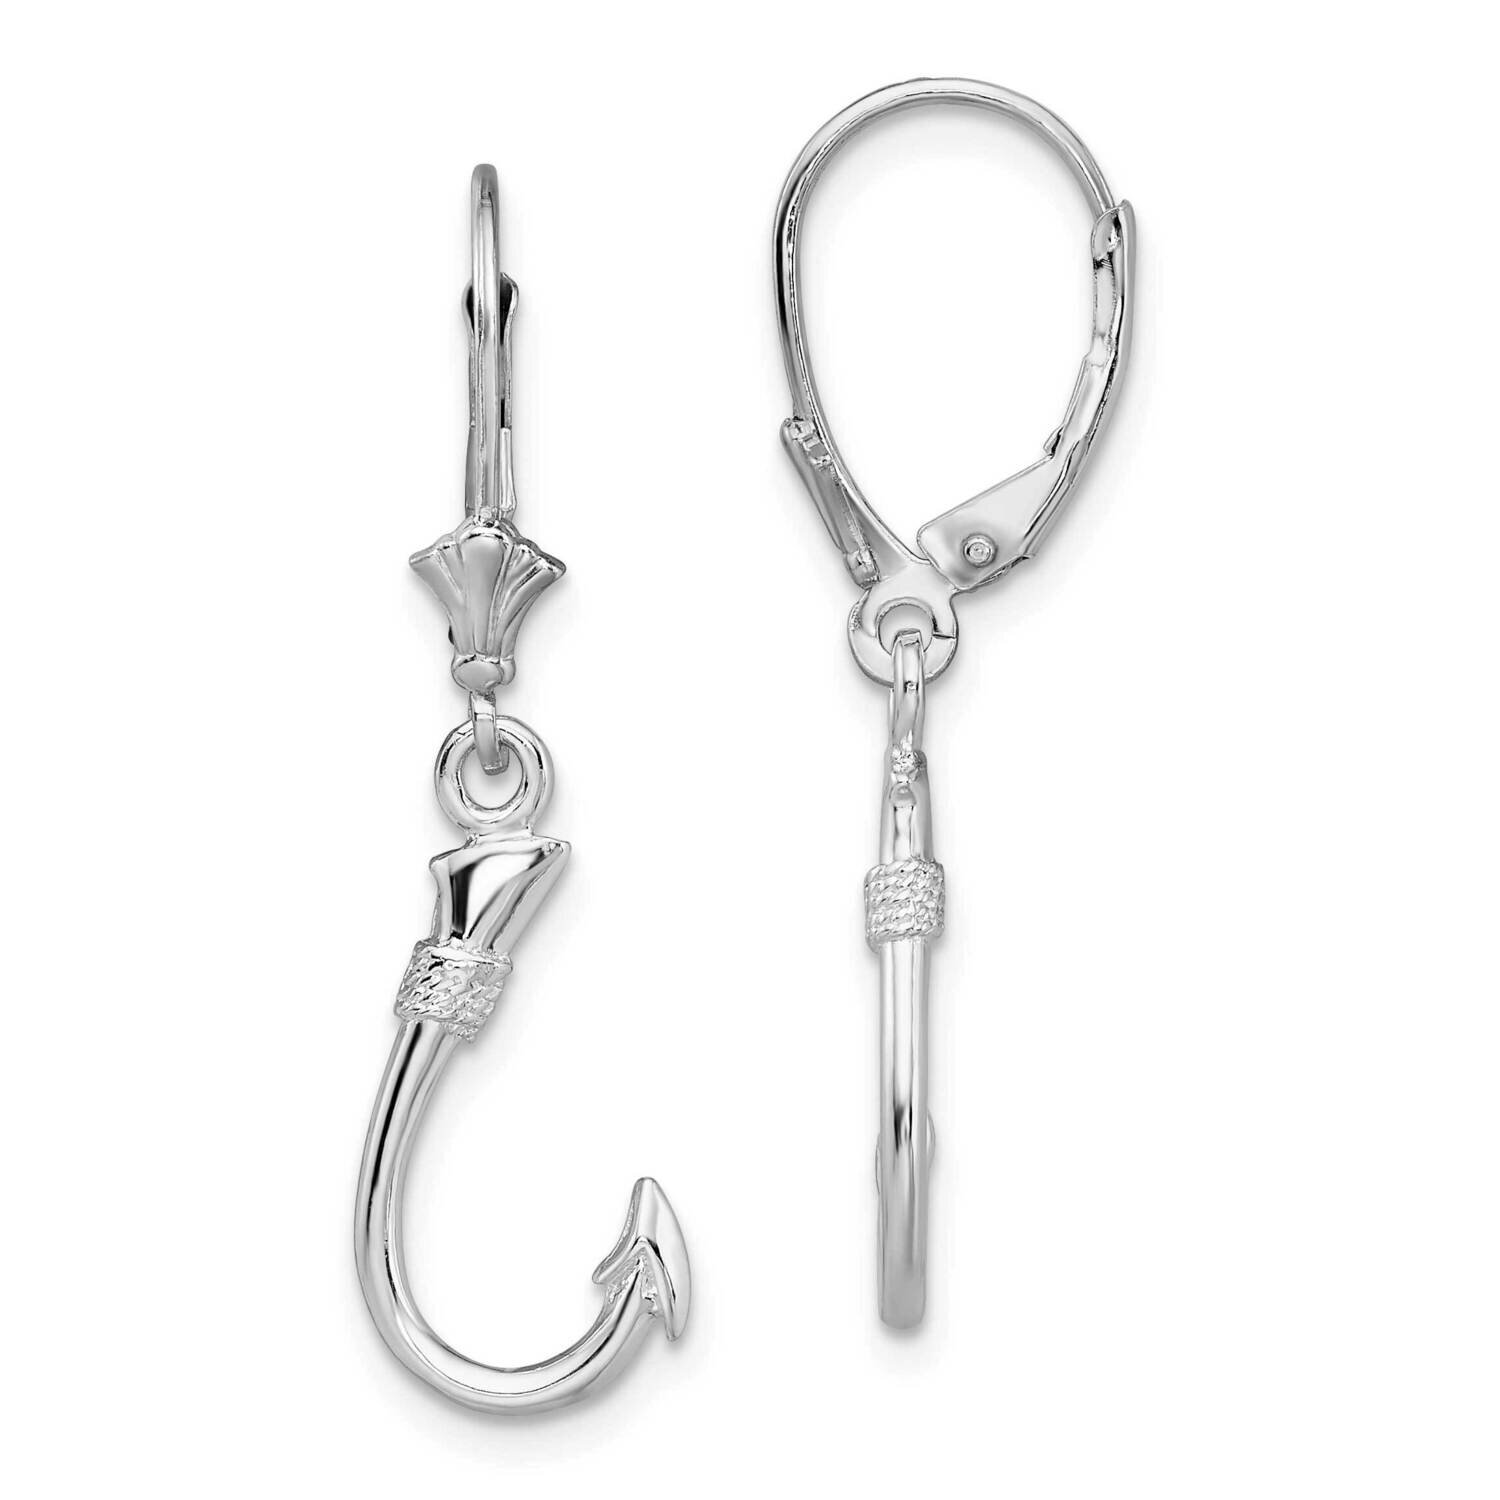 3D Fish Hook Leverback Earrings Sterling Silver Polished QE15554